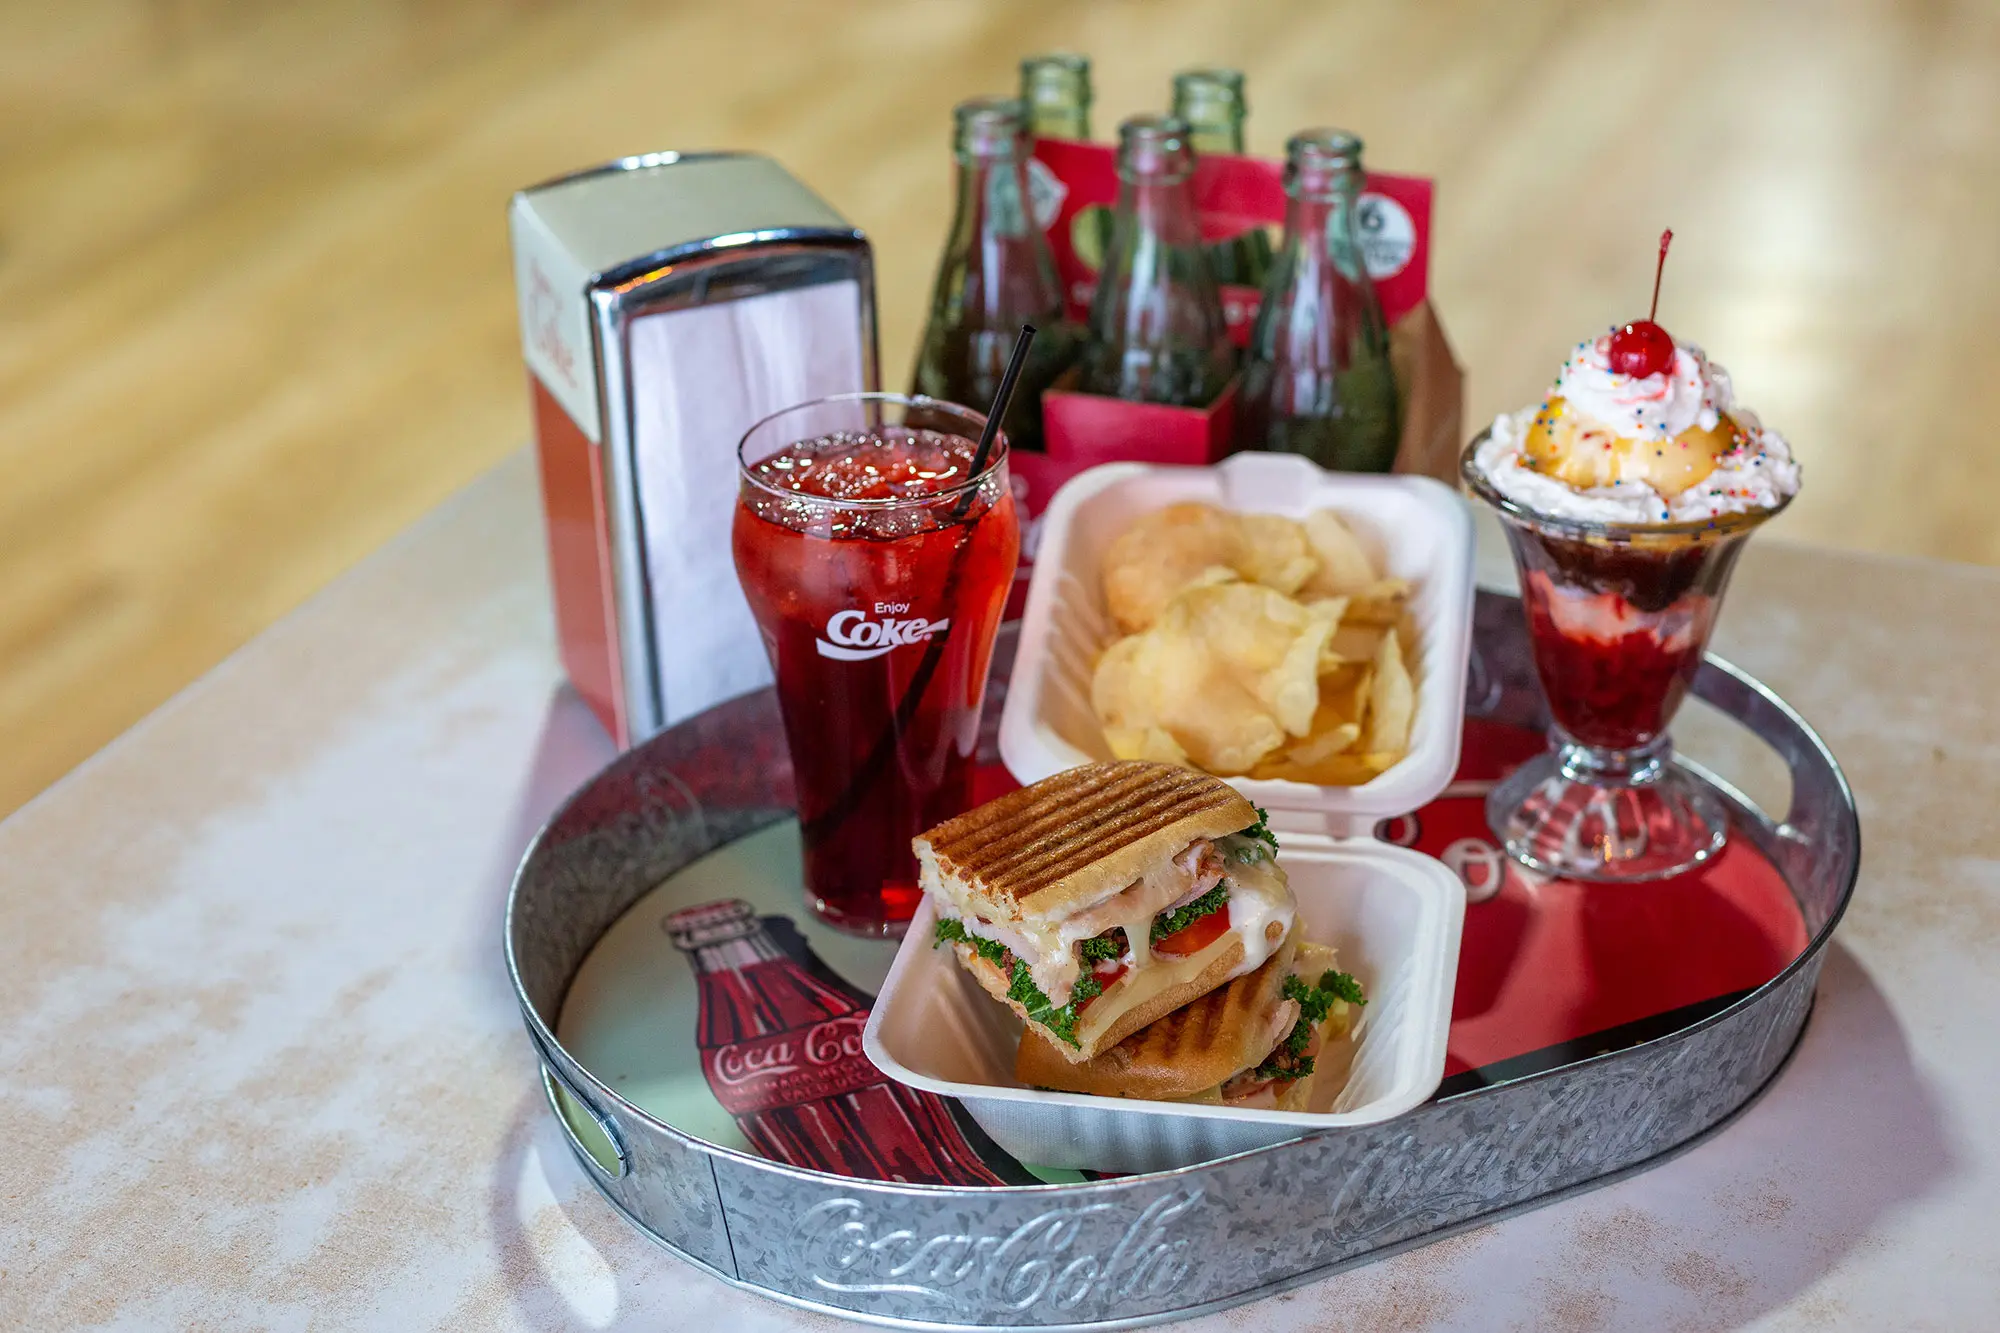 A tin tray containing a styrofoam box with a sandwich and chips alongside a coke and ice cream sundae.